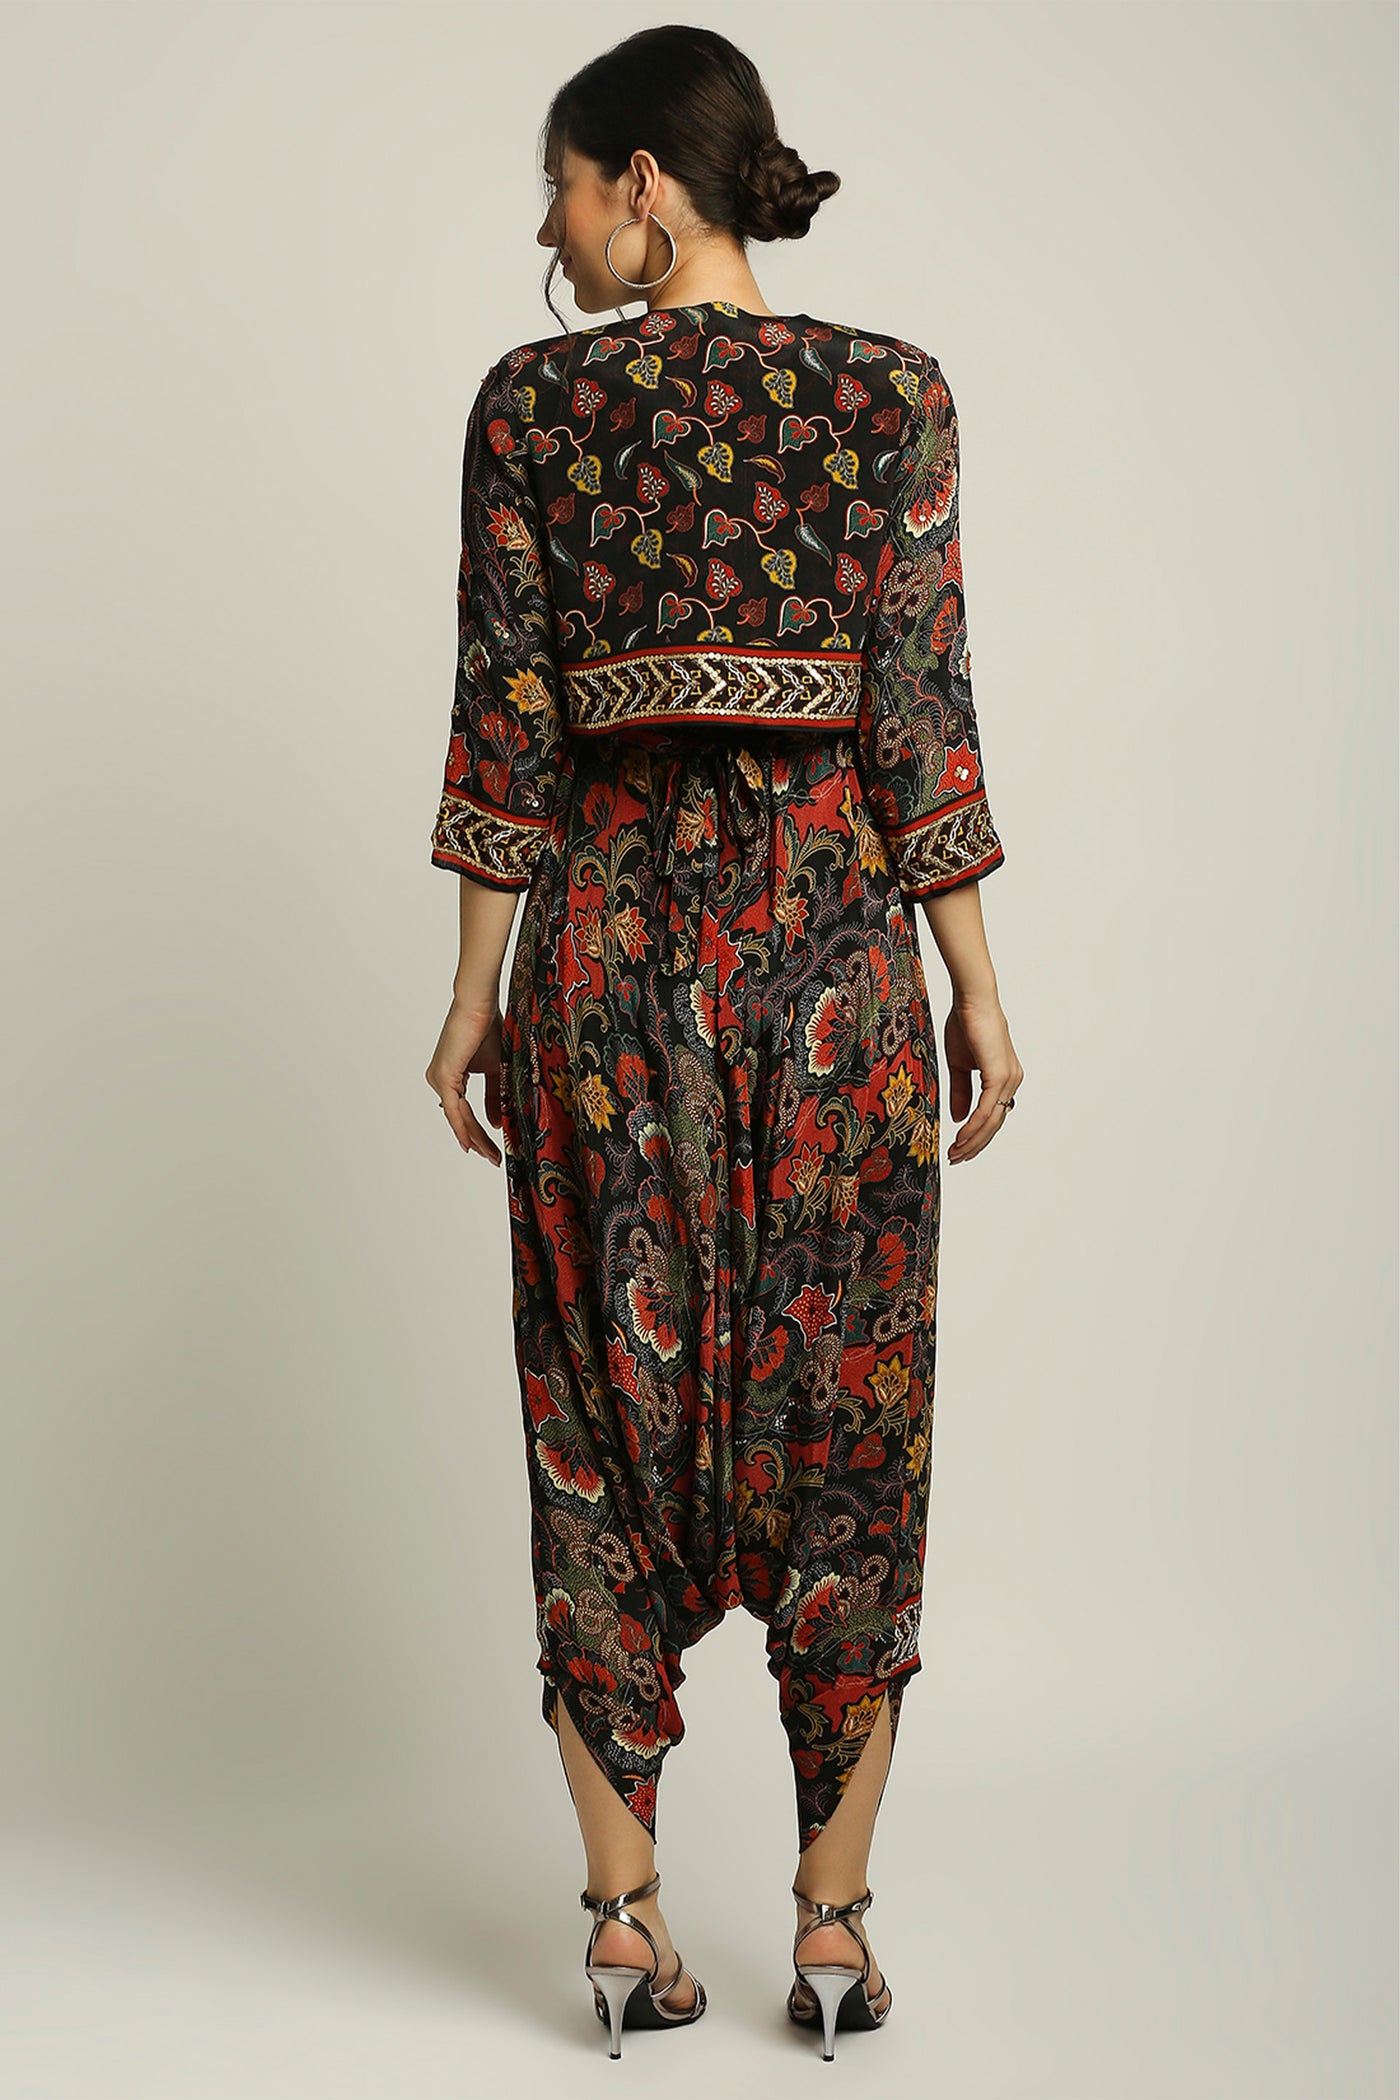 Buy Divena World Ethnic & Kalini jumpsuits online - 1 products | FASHIOLA.in